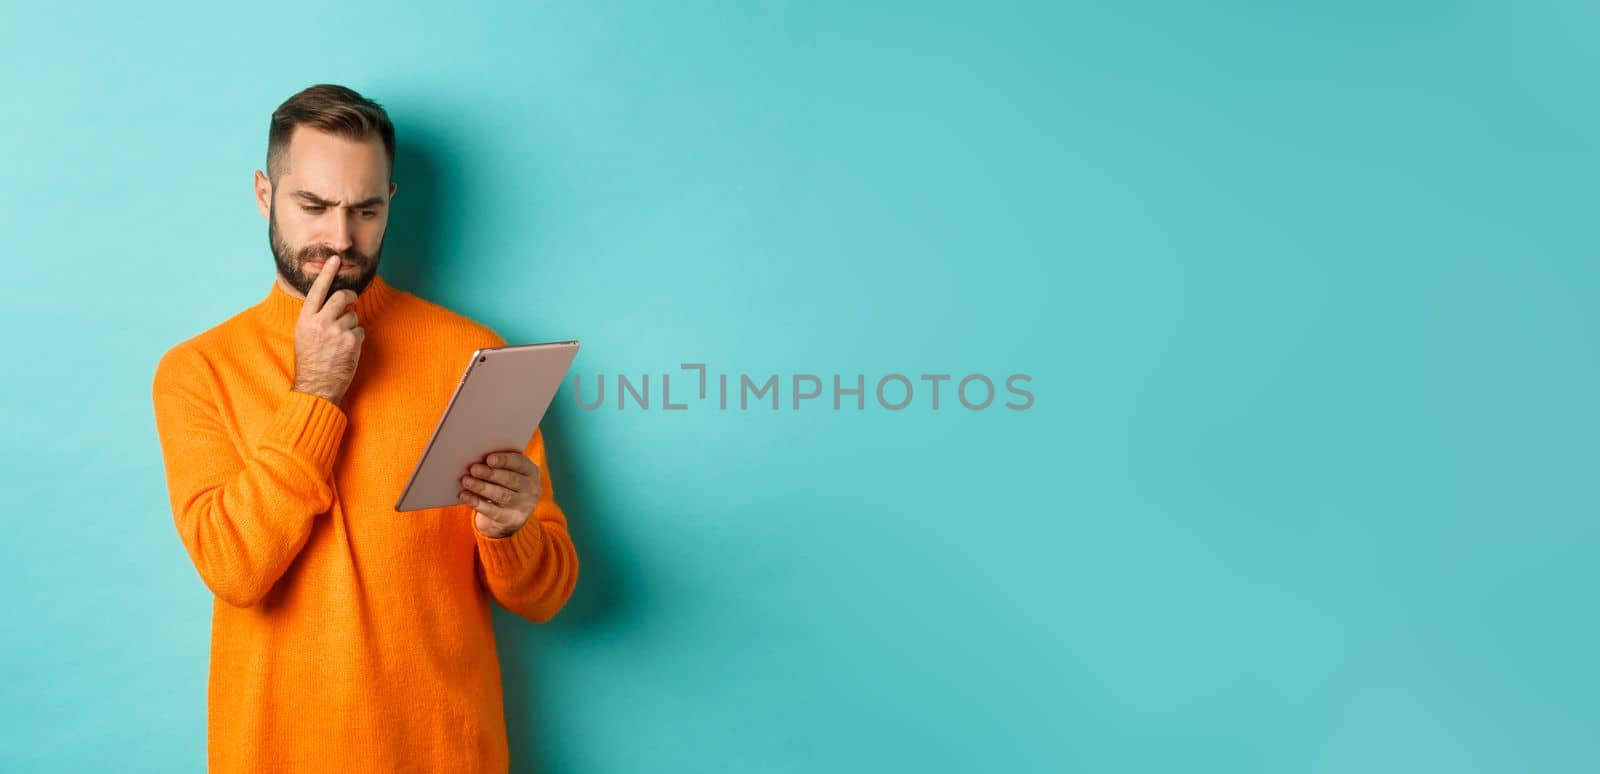 Serious man pondering and looking at digital tablet screen, reading social media, standing over turquoise background. Copy space